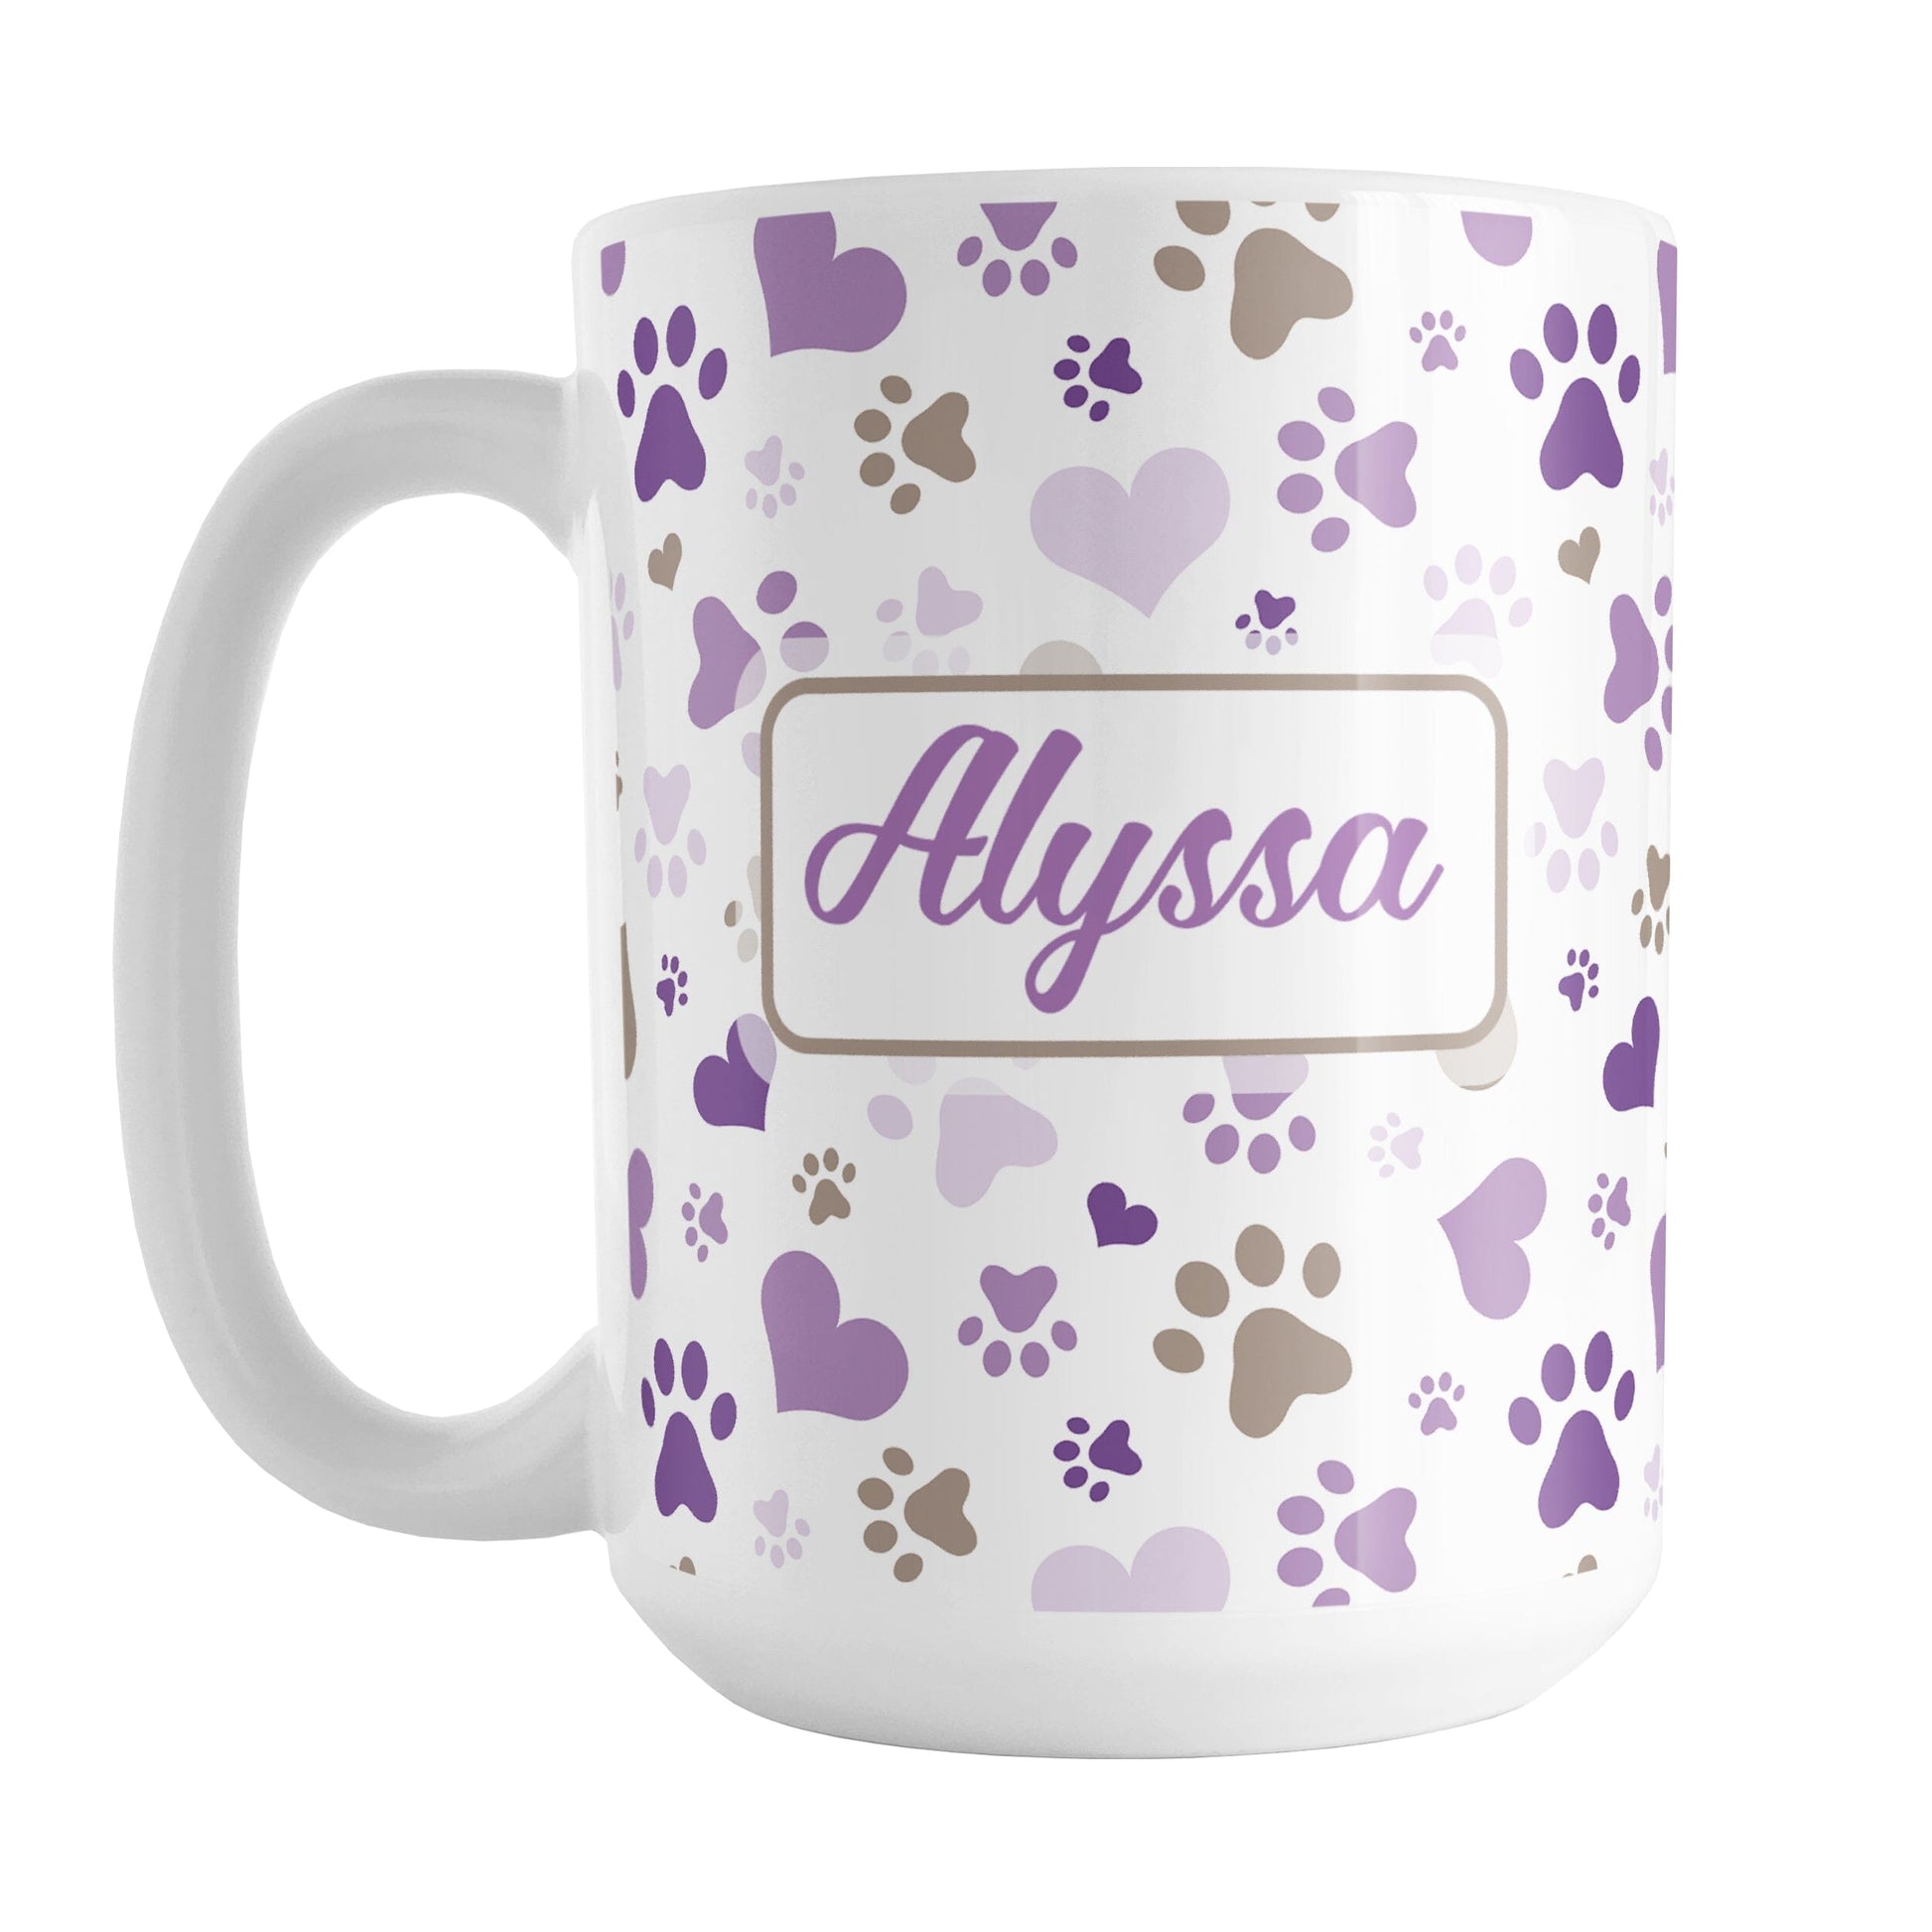 Personalized Purple Hearts and Paw Prints Mug (15oz) at Amy's Coffee Mugs. A ceramic coffee mug designed with a pattern of hearts and paw prints in brown and different shades of purple that wraps around the mug to the handle. Your personalized name is printed in purple on both sides of the mug, making it the perfect gift. This mug is perfect for people love dogs and cute paw print designs.